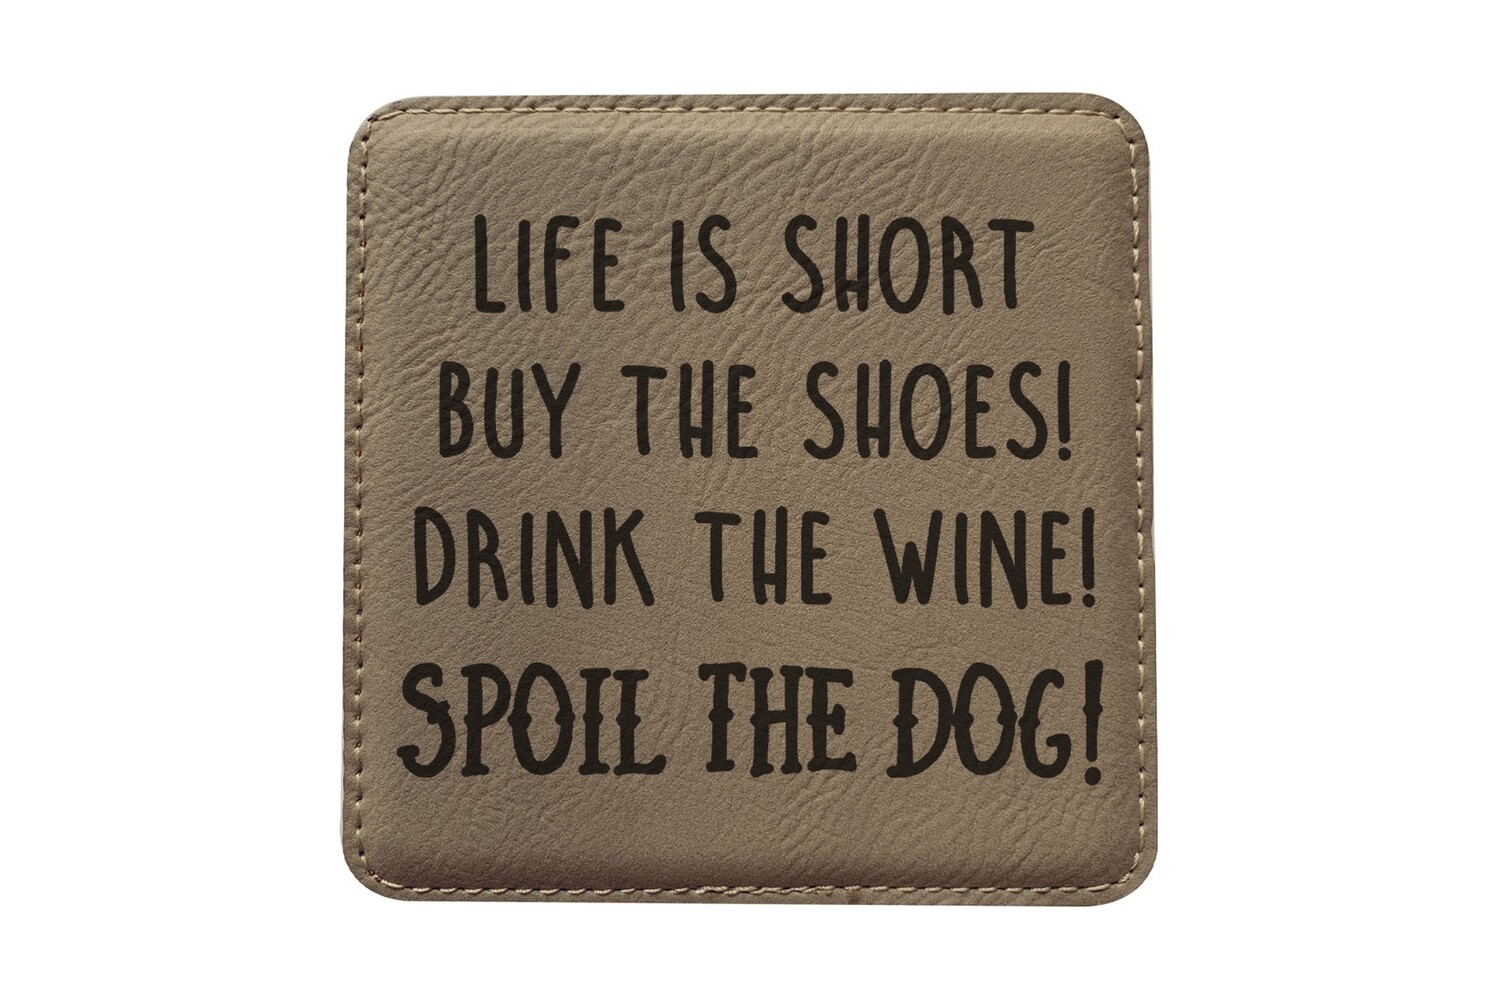 Life is Short - Spoil the Dog Leatherette Coaster